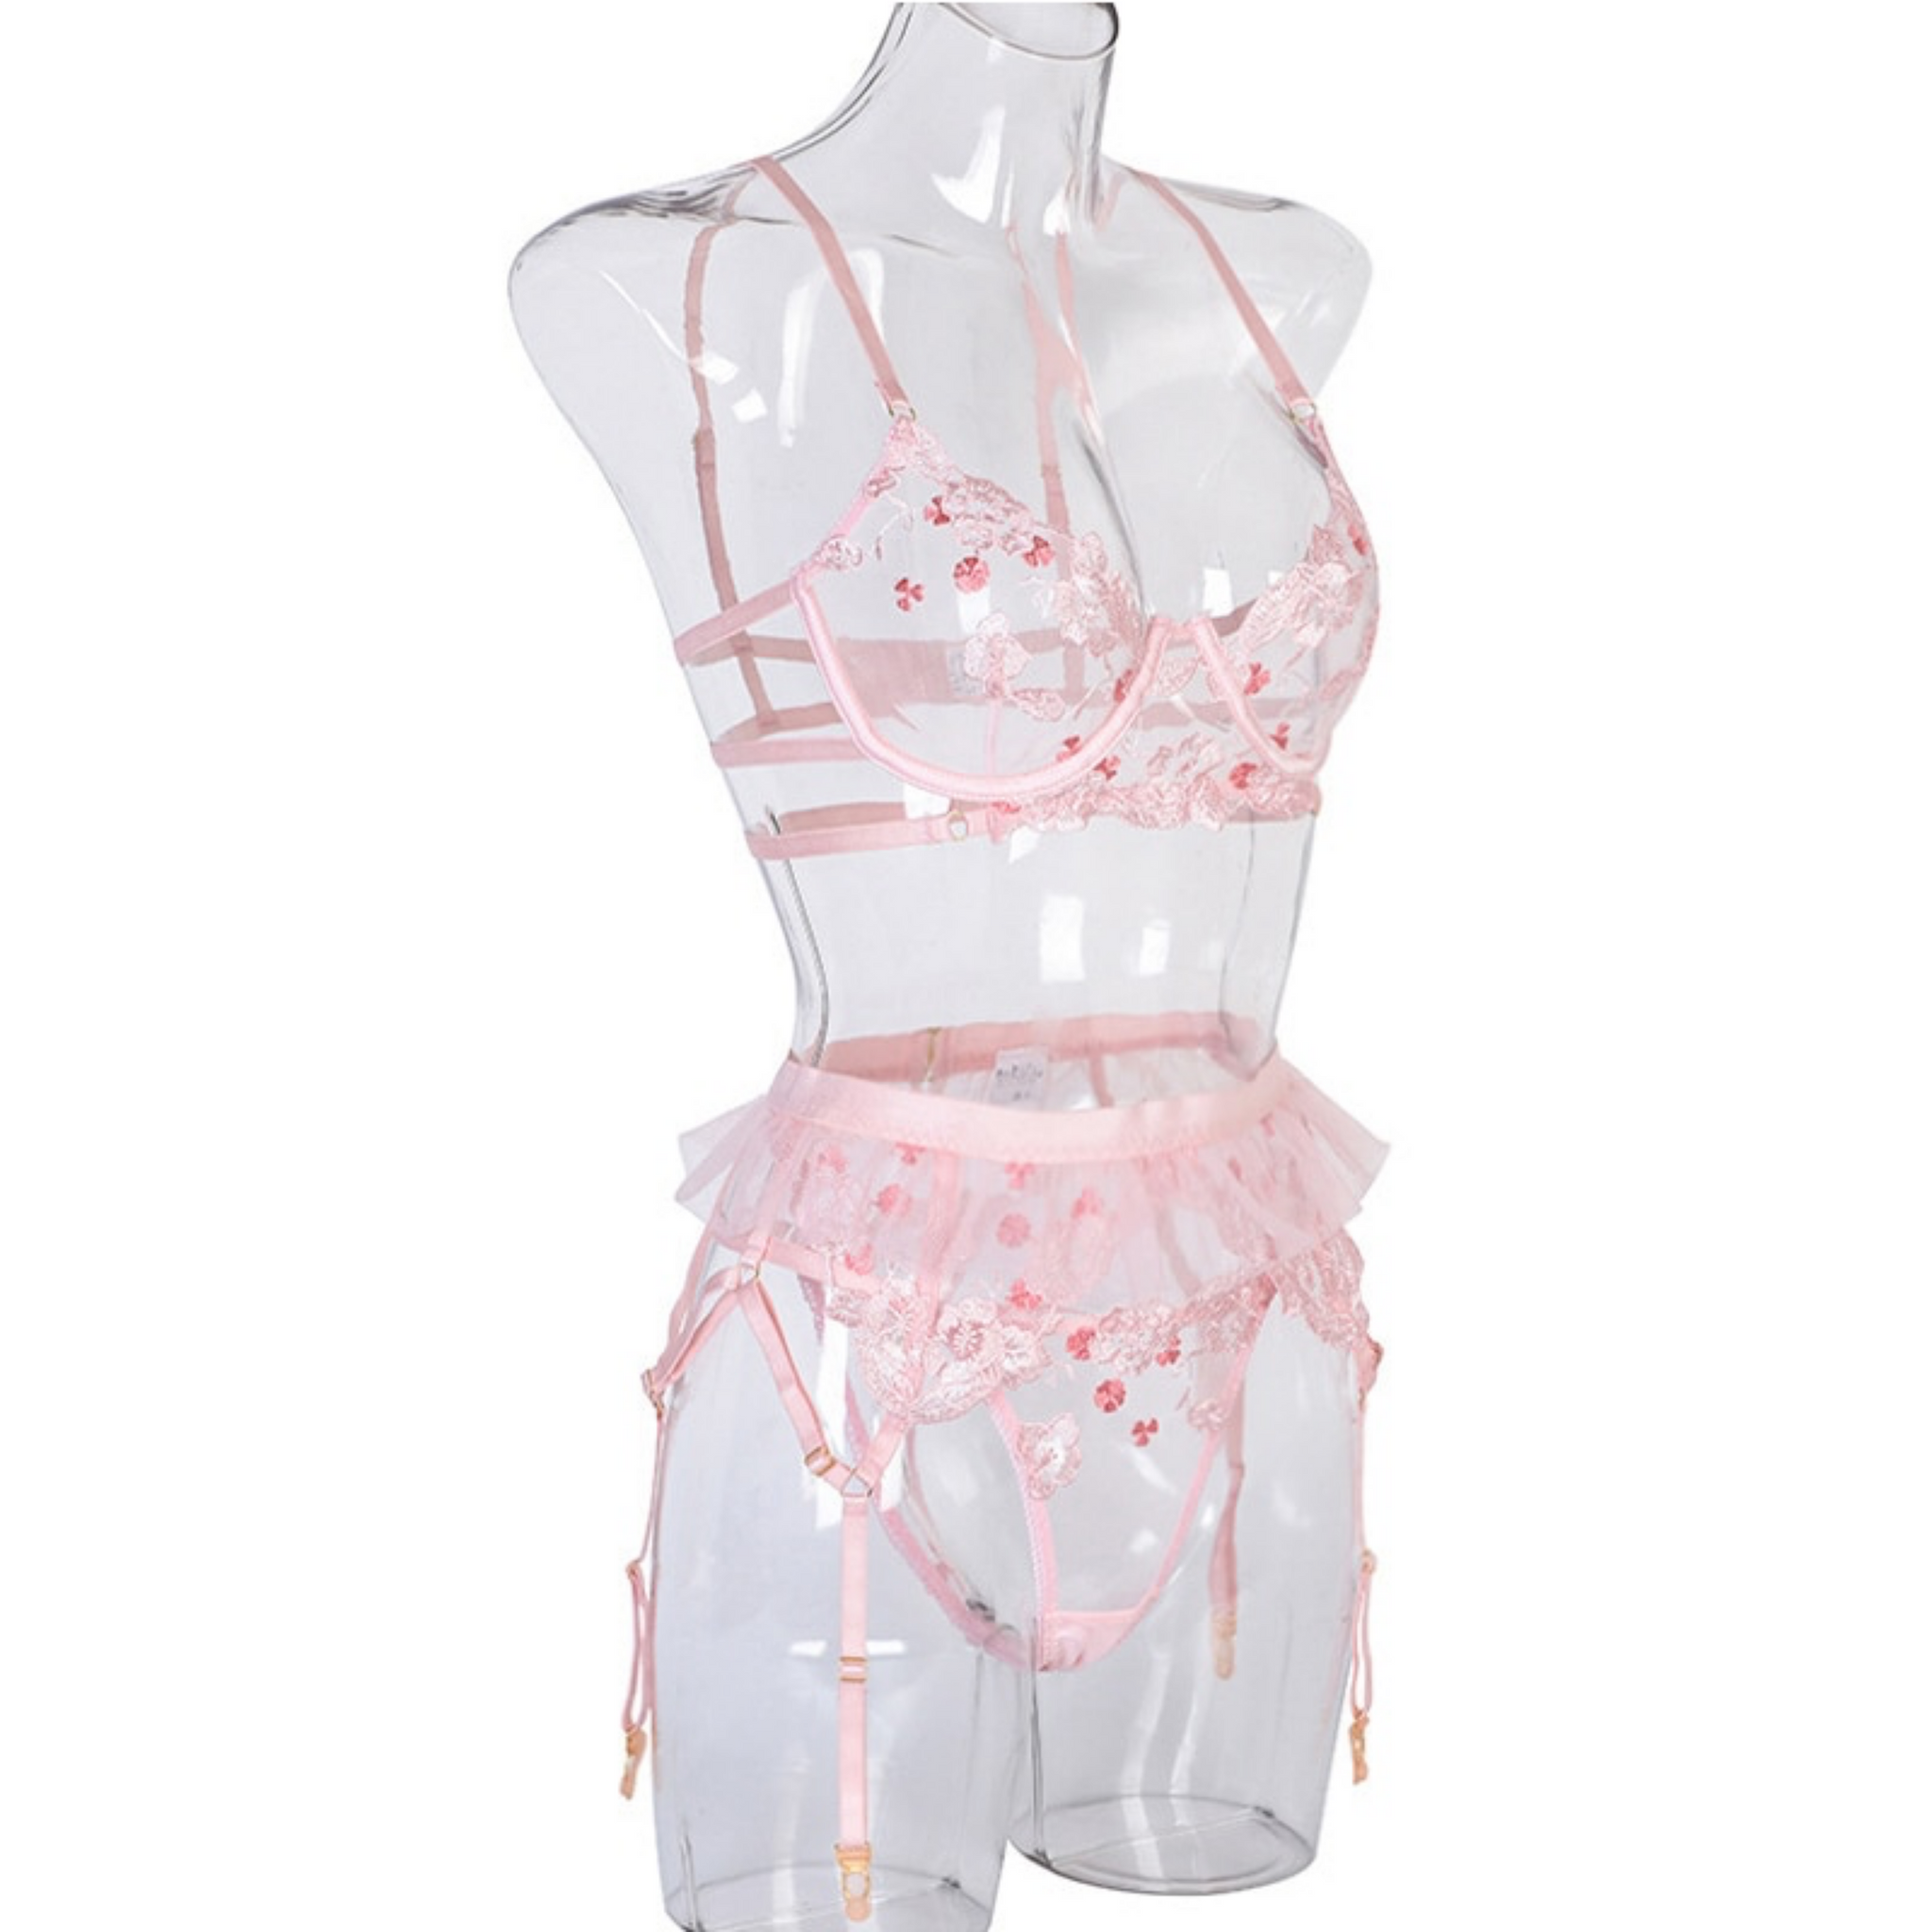 Pink delicate Floral Lingerie with Garter Belt - Anissa Atelier Affordable,  Unique and Quality Lingerie and More. For more Femininity!